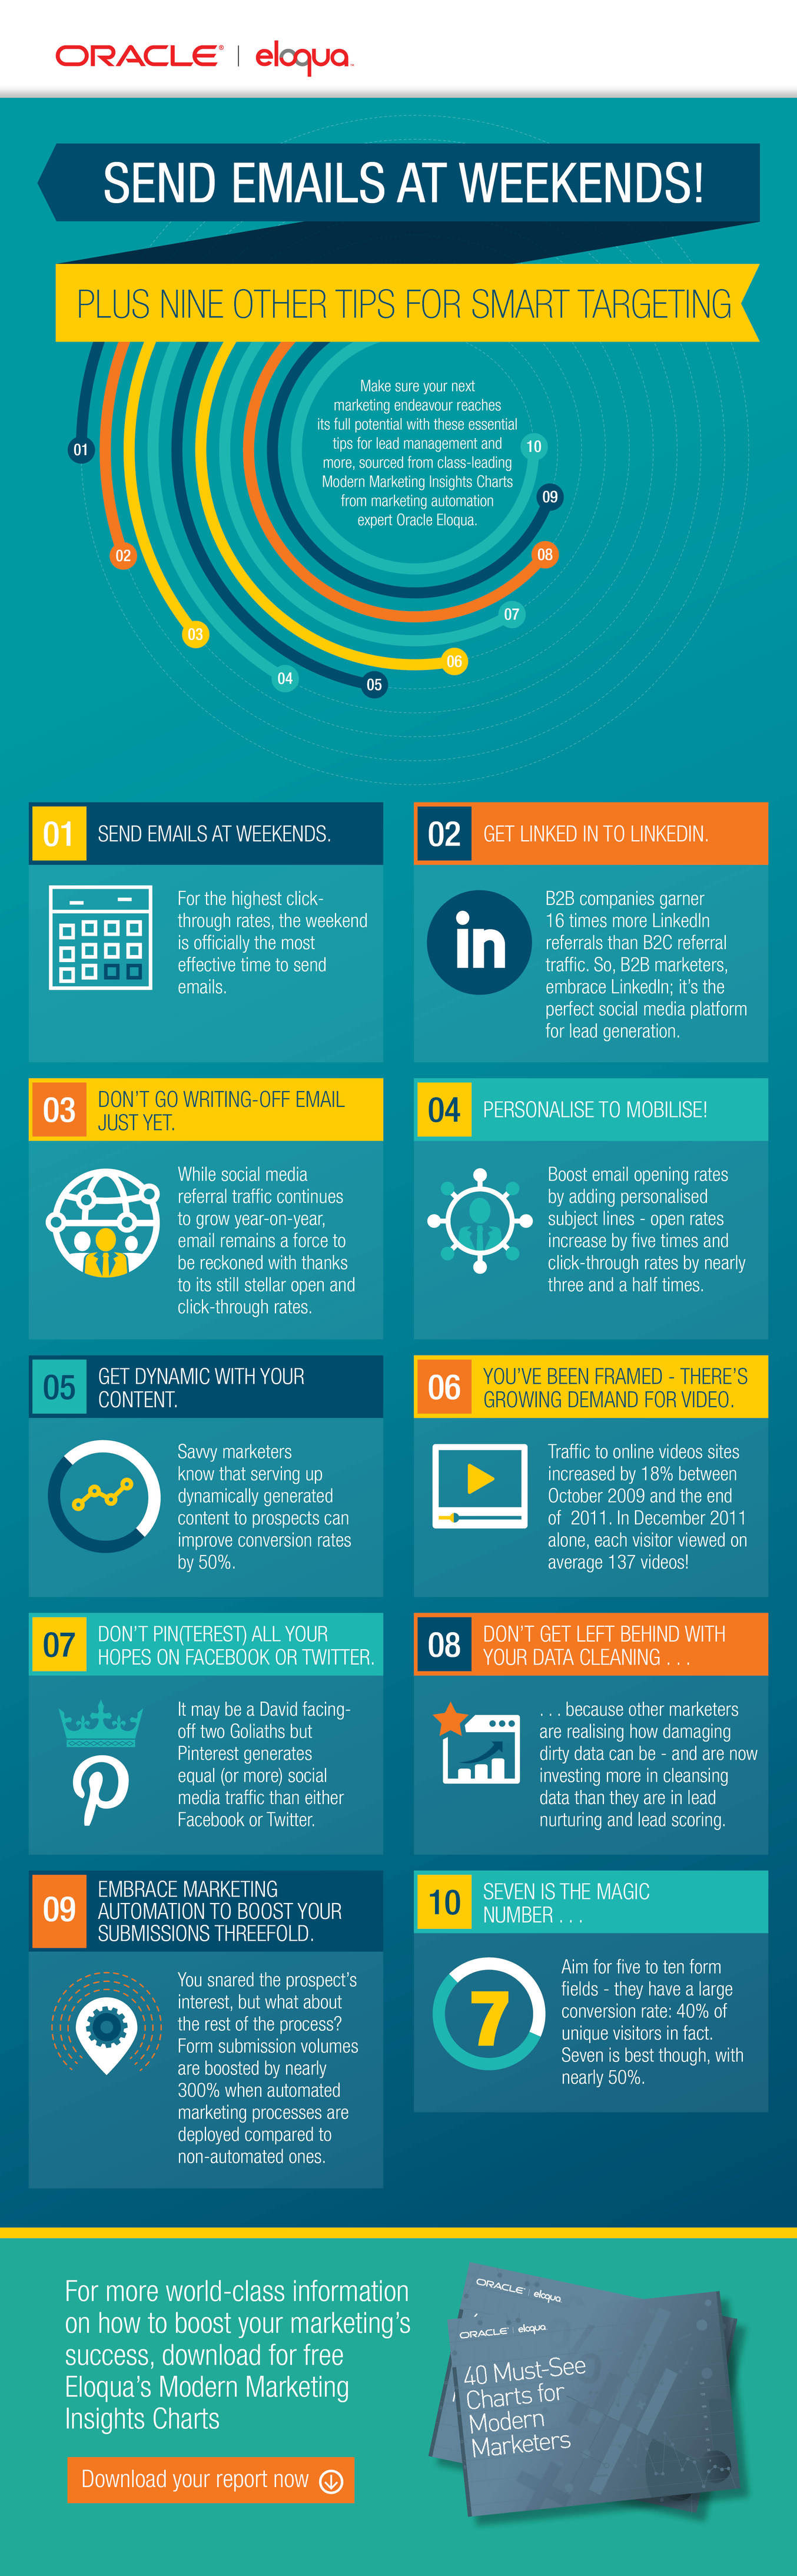 Don't Pin(terest) All Your Hopes On Facebook Or Twitter Plus 9 Other Tips For Smart Targeting - infographic